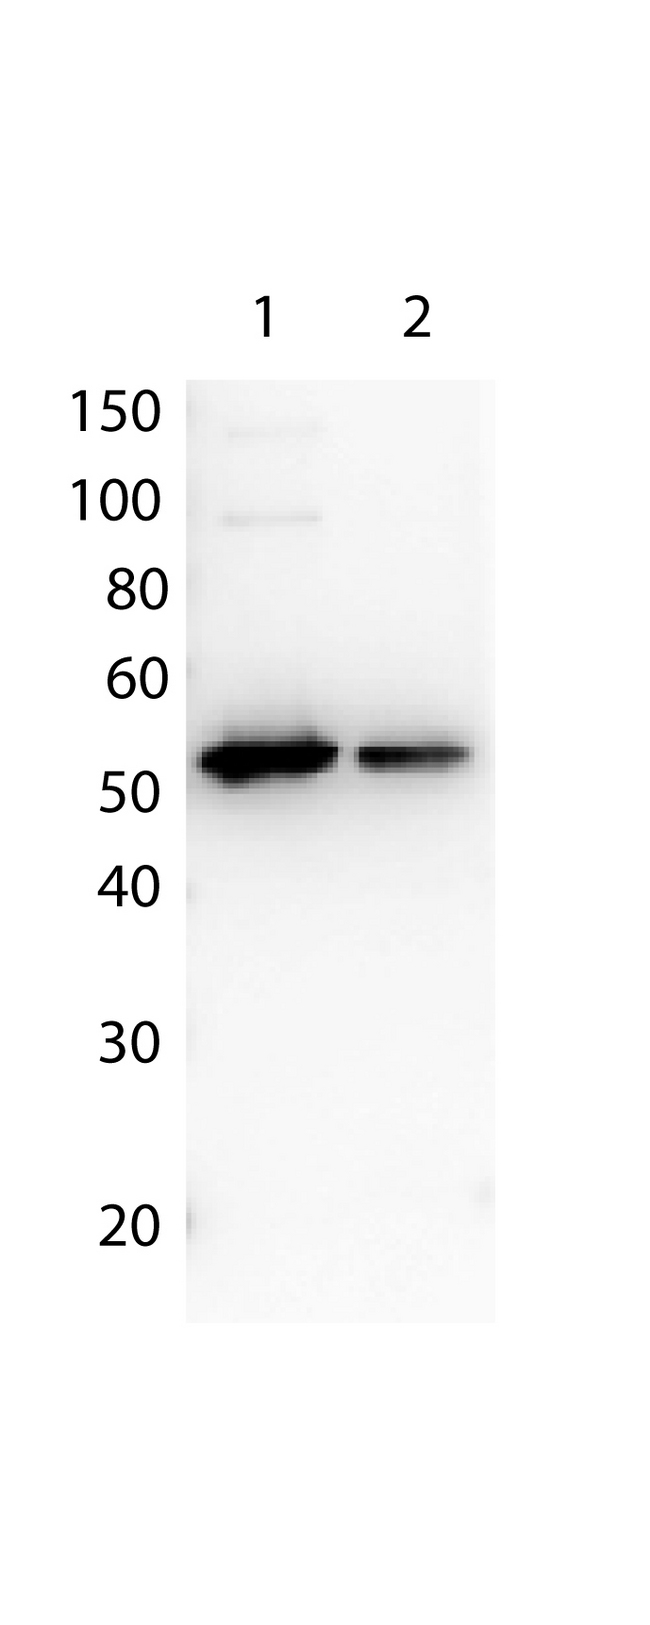 DYKDDDDK Tag Antibody - Antibody for the detection of FLAG conjugated proteins - Western Blot. Affinity Purified Antibody to detect FLAG conjugated proteins detects both C terminal linked and N terminal linked FLAG tagged recombinant proteins by western blot. This antibody was used at a dilution of 1:2500 to detect 1.0 ug of recombinant protein containing either the FLAG epitope tag linked at the carboxy (C) or the amino (N) terminus of the recombinant protein. A 4-20% gradient gel was used to resolve the protein by SDS-PAGE. The protein was transferred to nitrocellulose using standard methods. After blocking, the membrane was probed with the primary antibody for 1 h at room temperature followed by washes and reaction with a 1:10000 dilution of IRDye 800 conjugated Gt-a-Rabbit IgG (H&L) MX10 (code for 30 min at room temperature. LICORs Odyssey Infrared Imaging System was used to scan and process the image. Other detection systems will yield similar results.